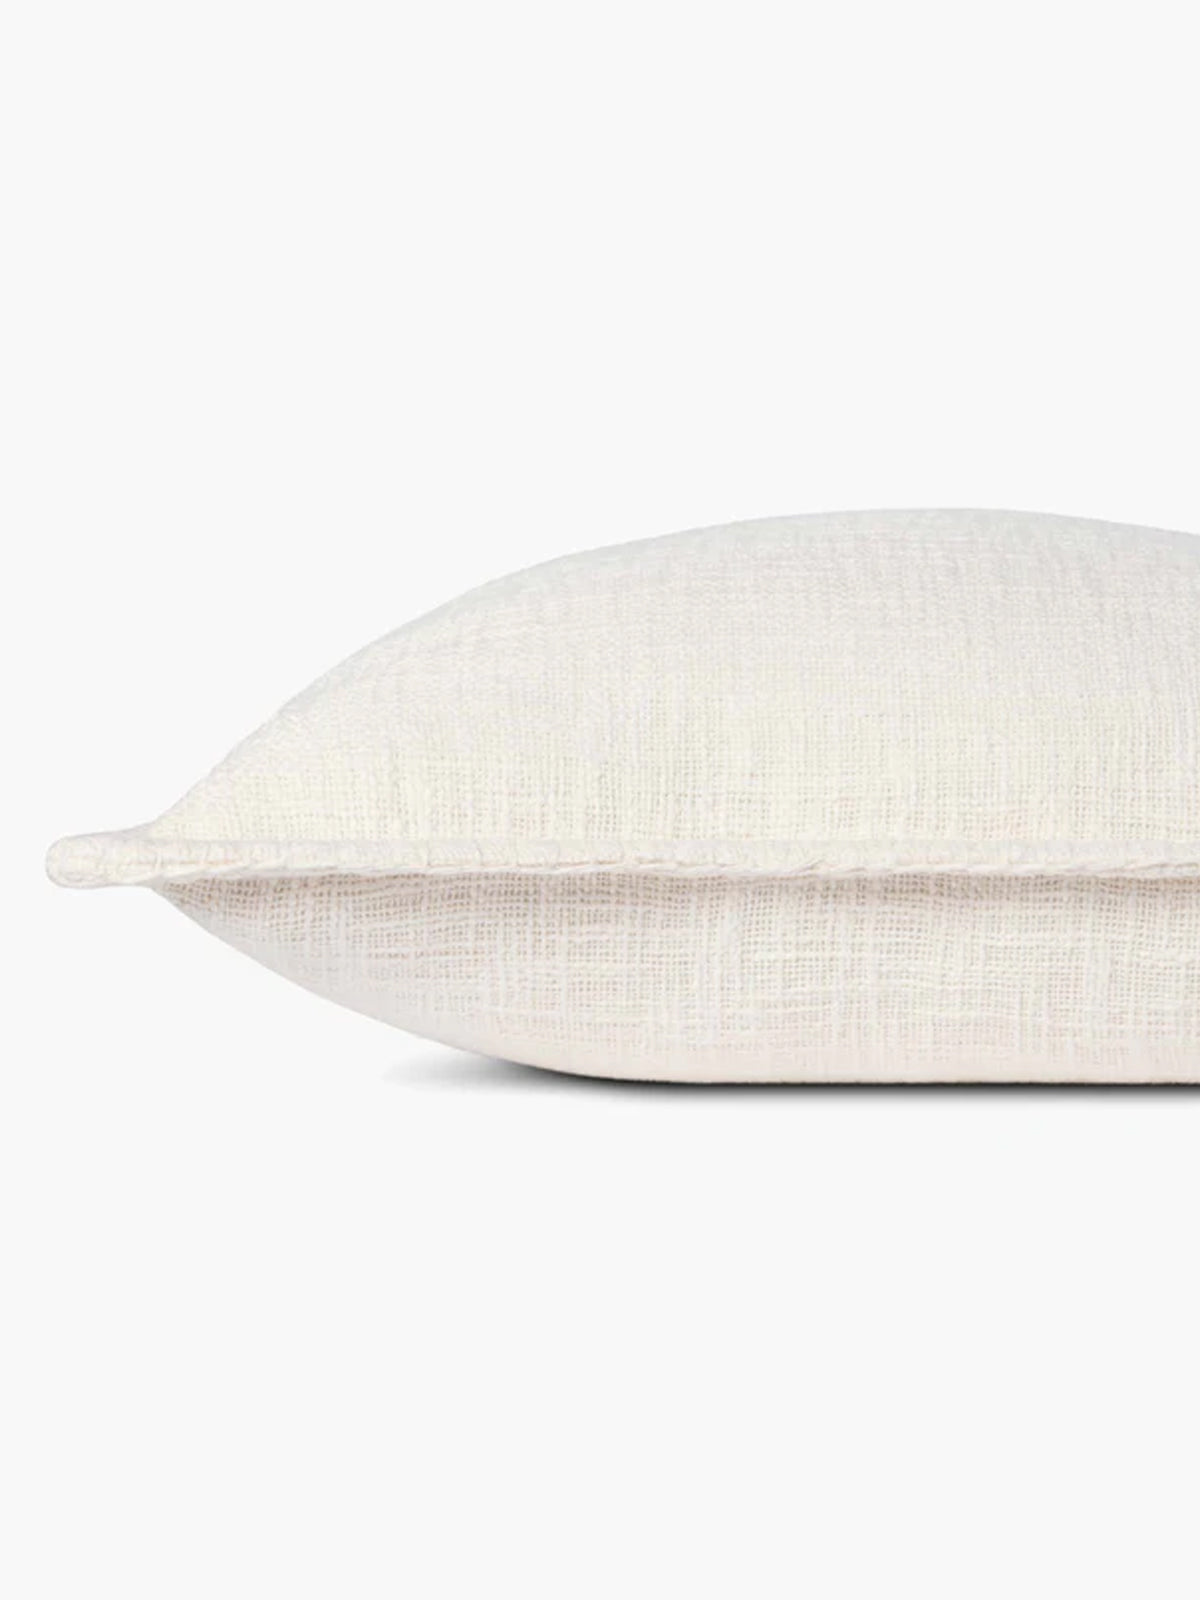 Ivory Pillow